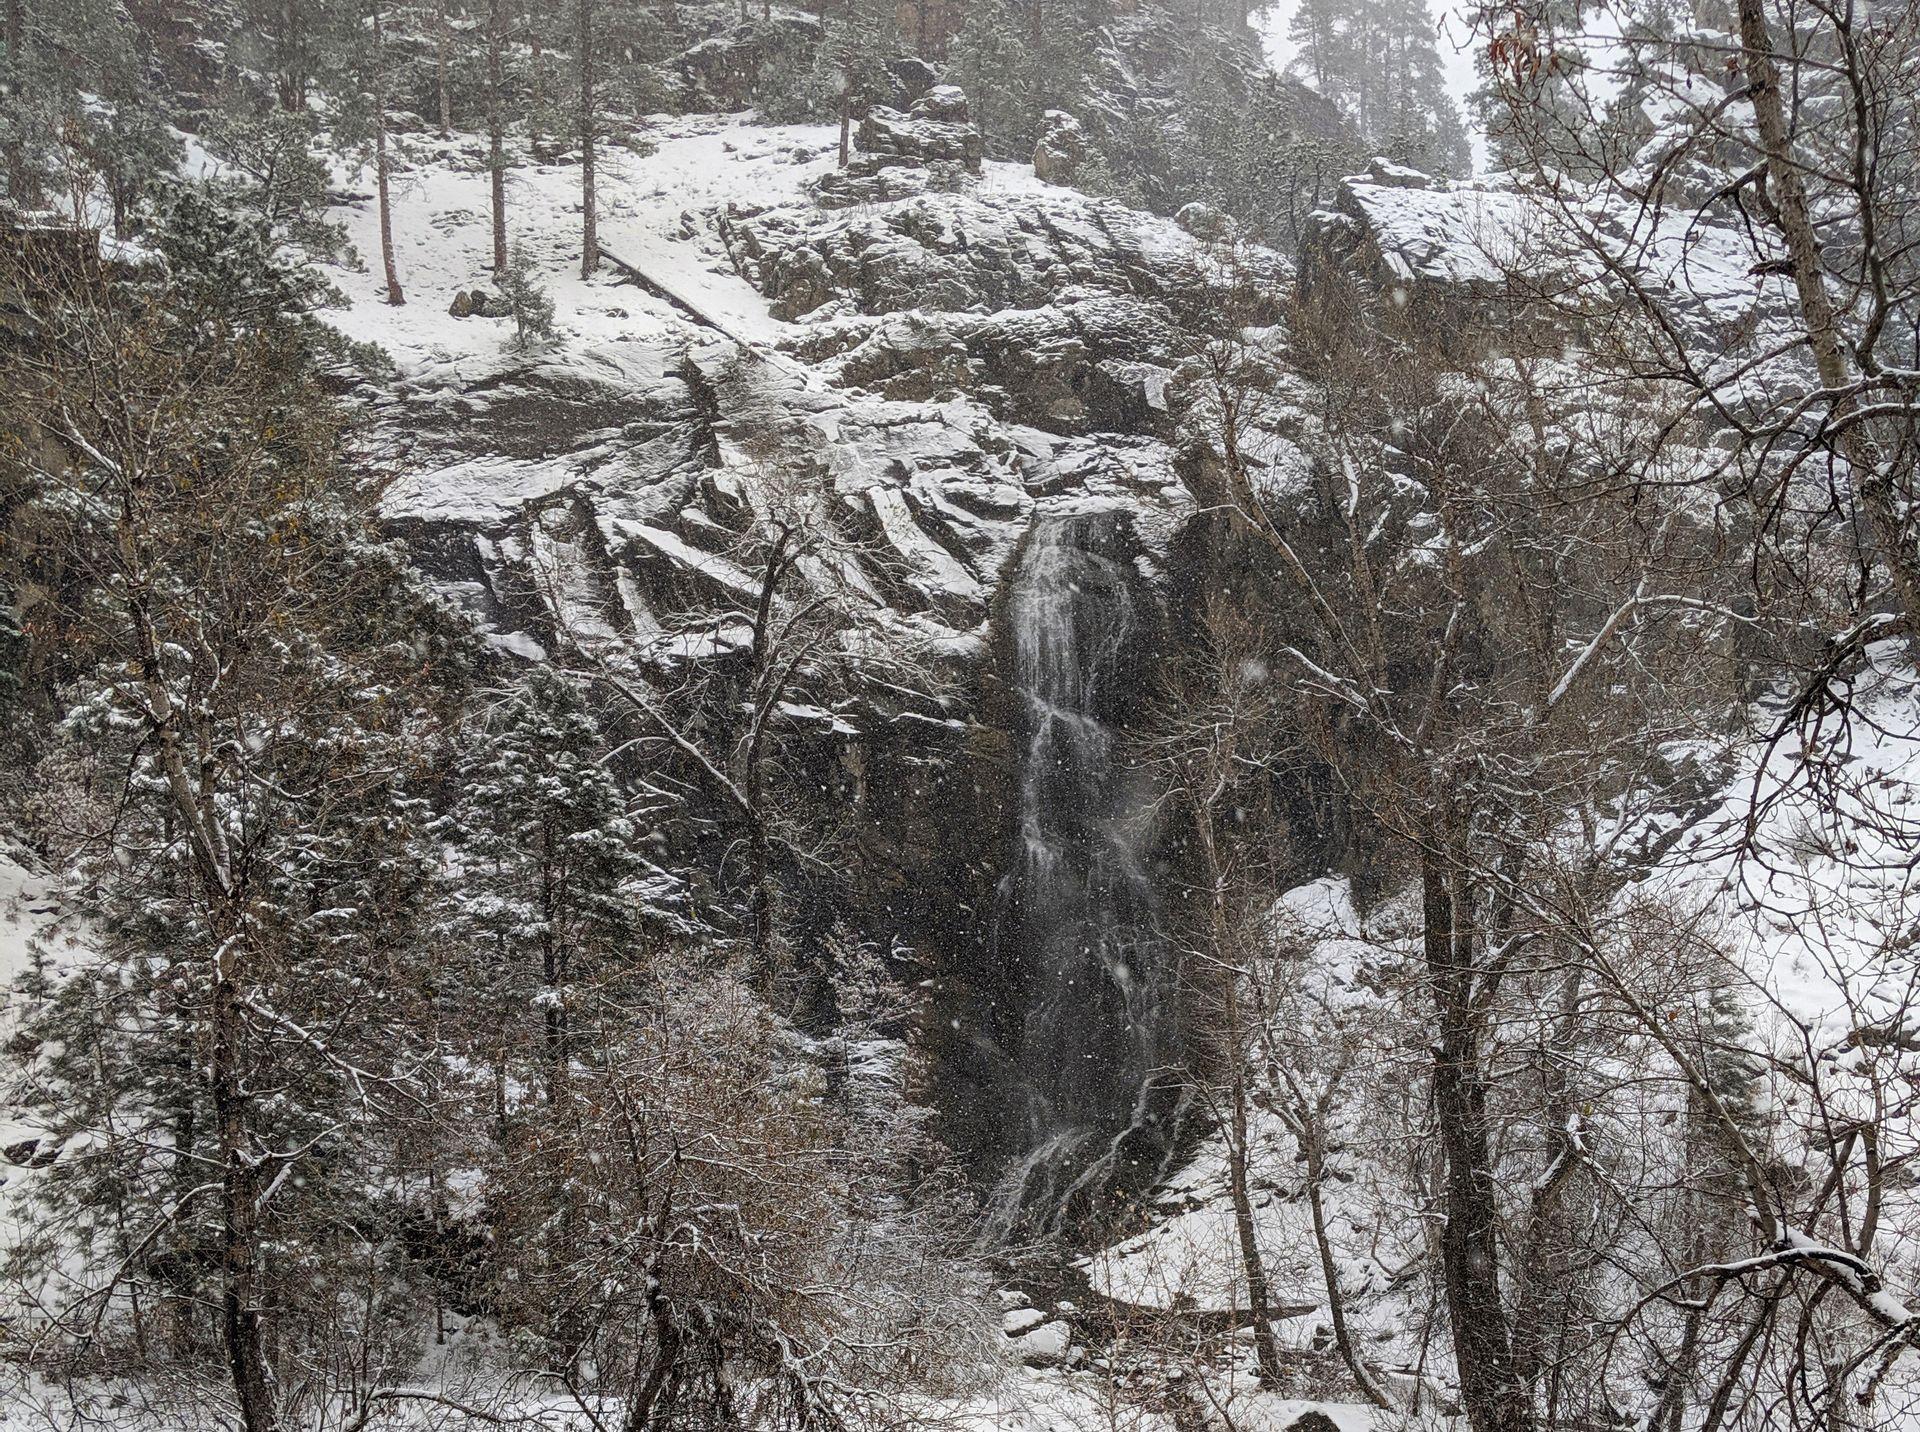 A small waterfall surrounded by snow.